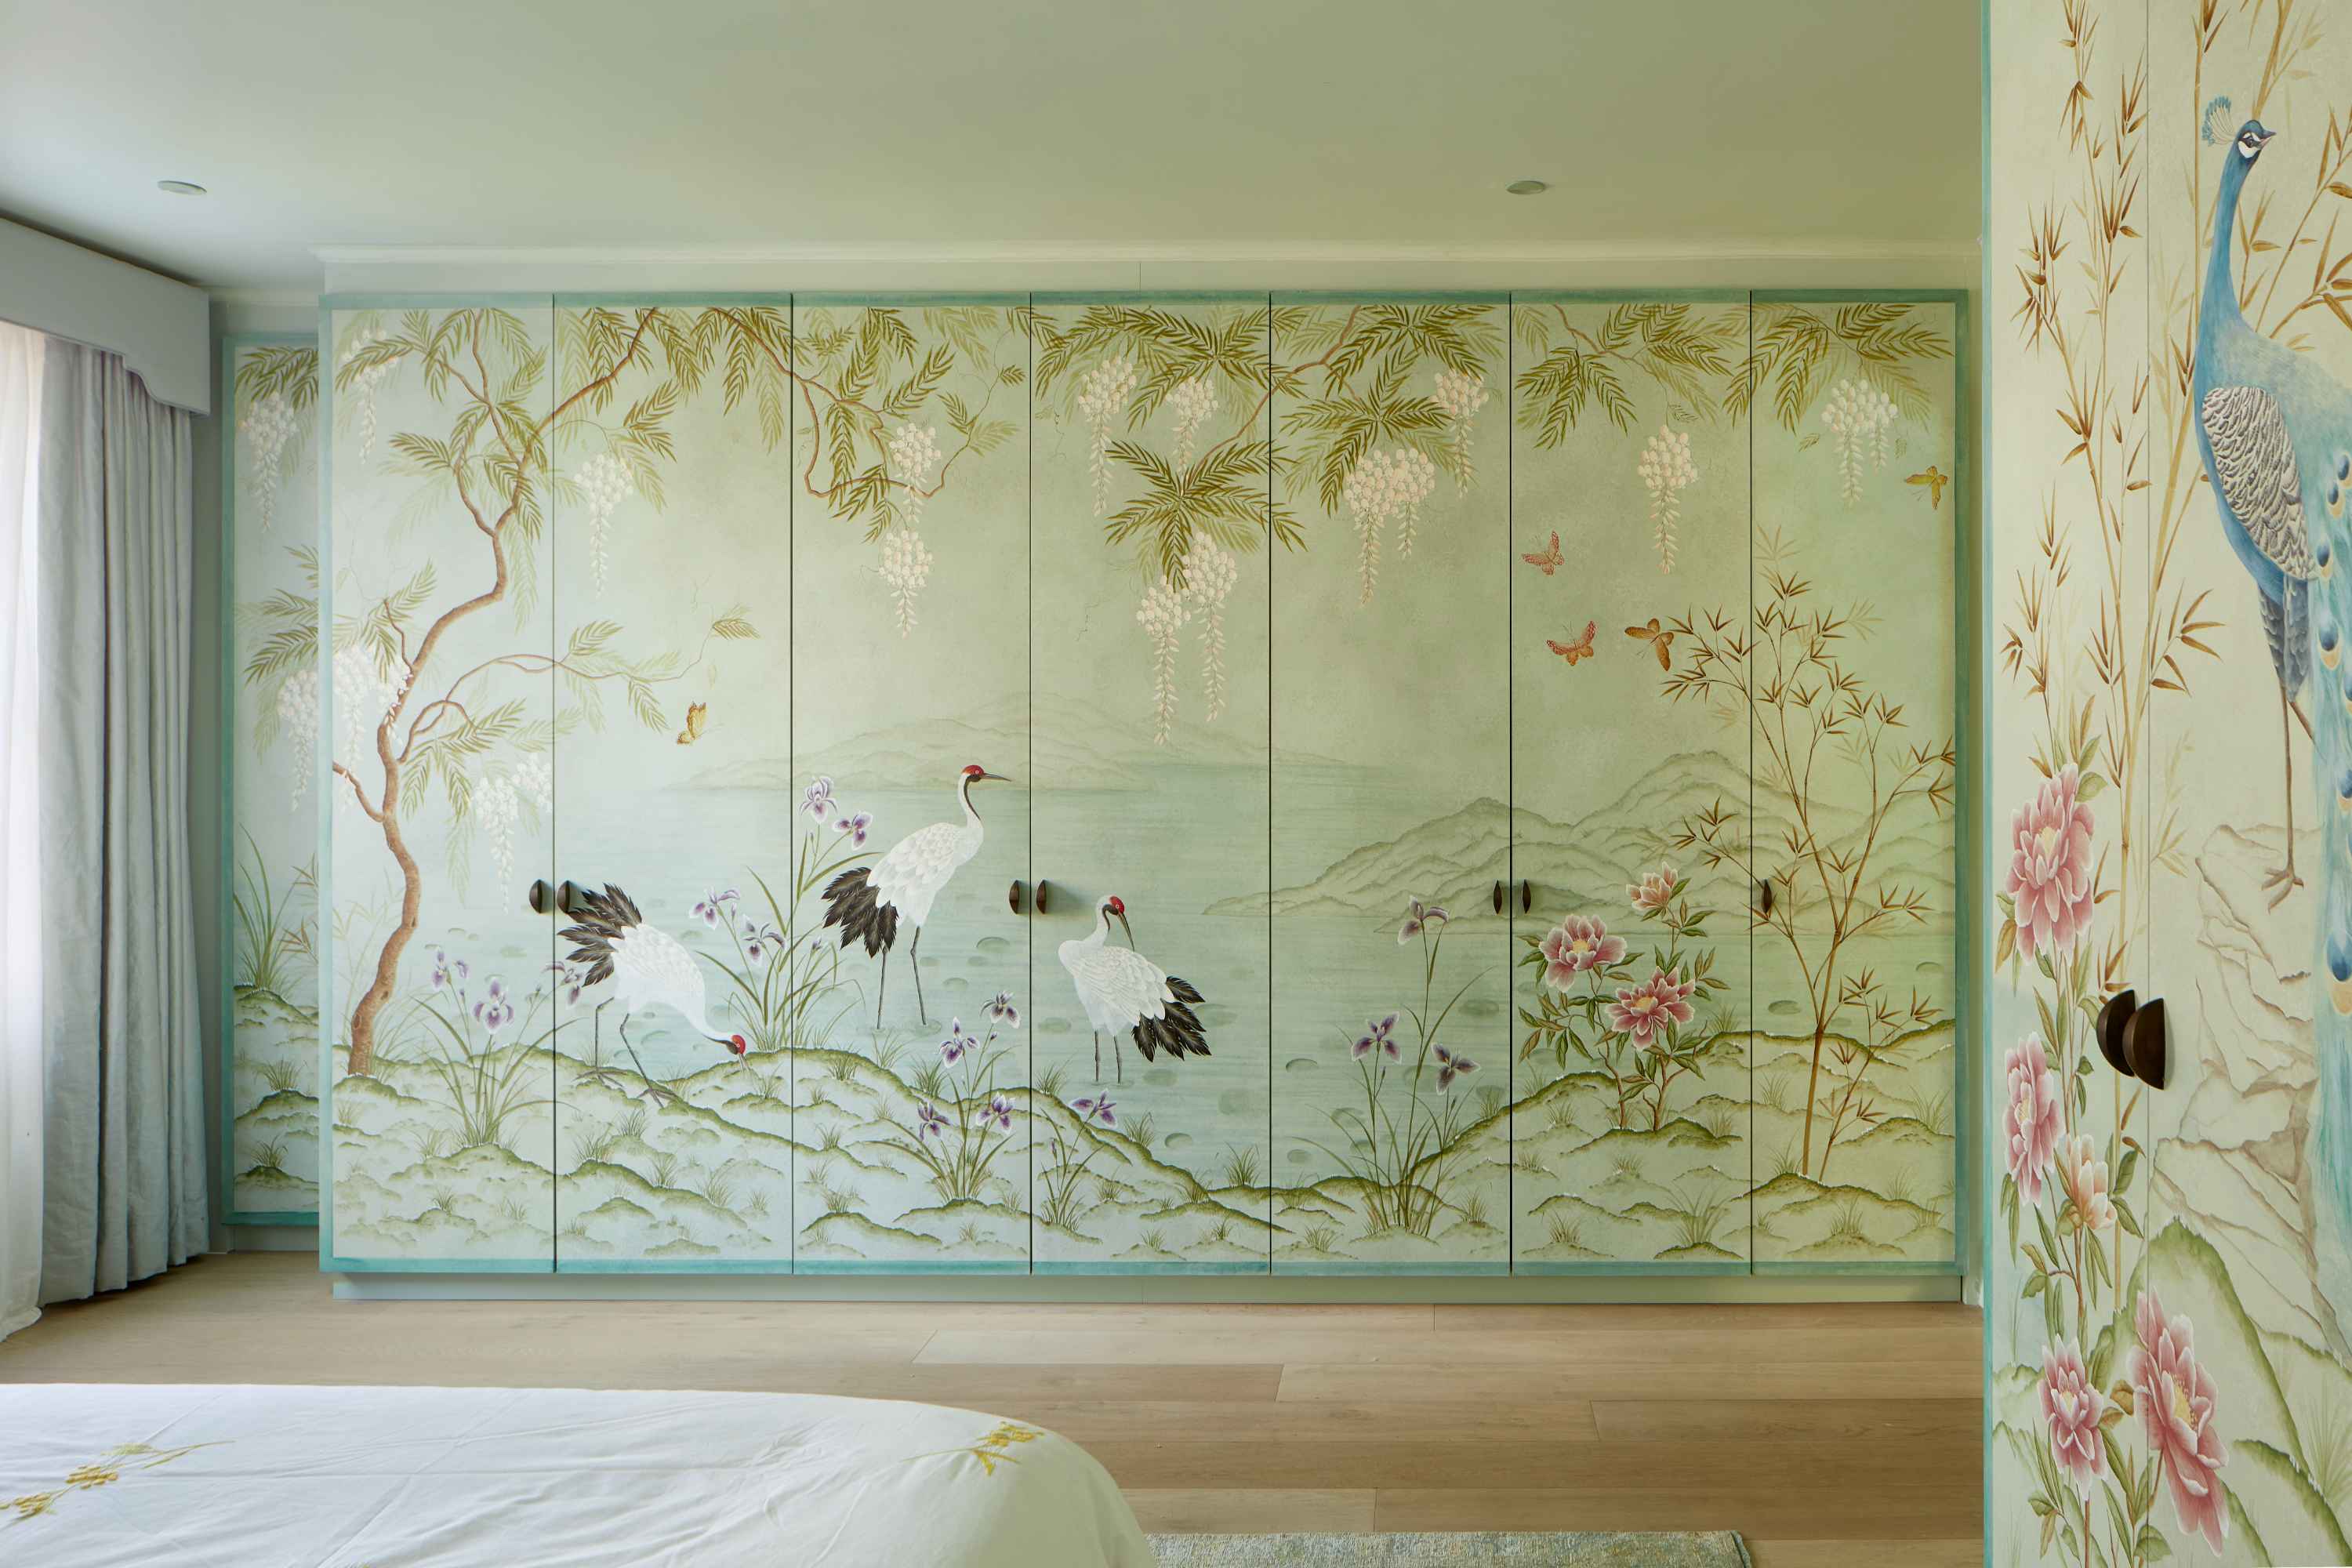 Chinoiserie wardrobe mural hand painted by Diane Hill